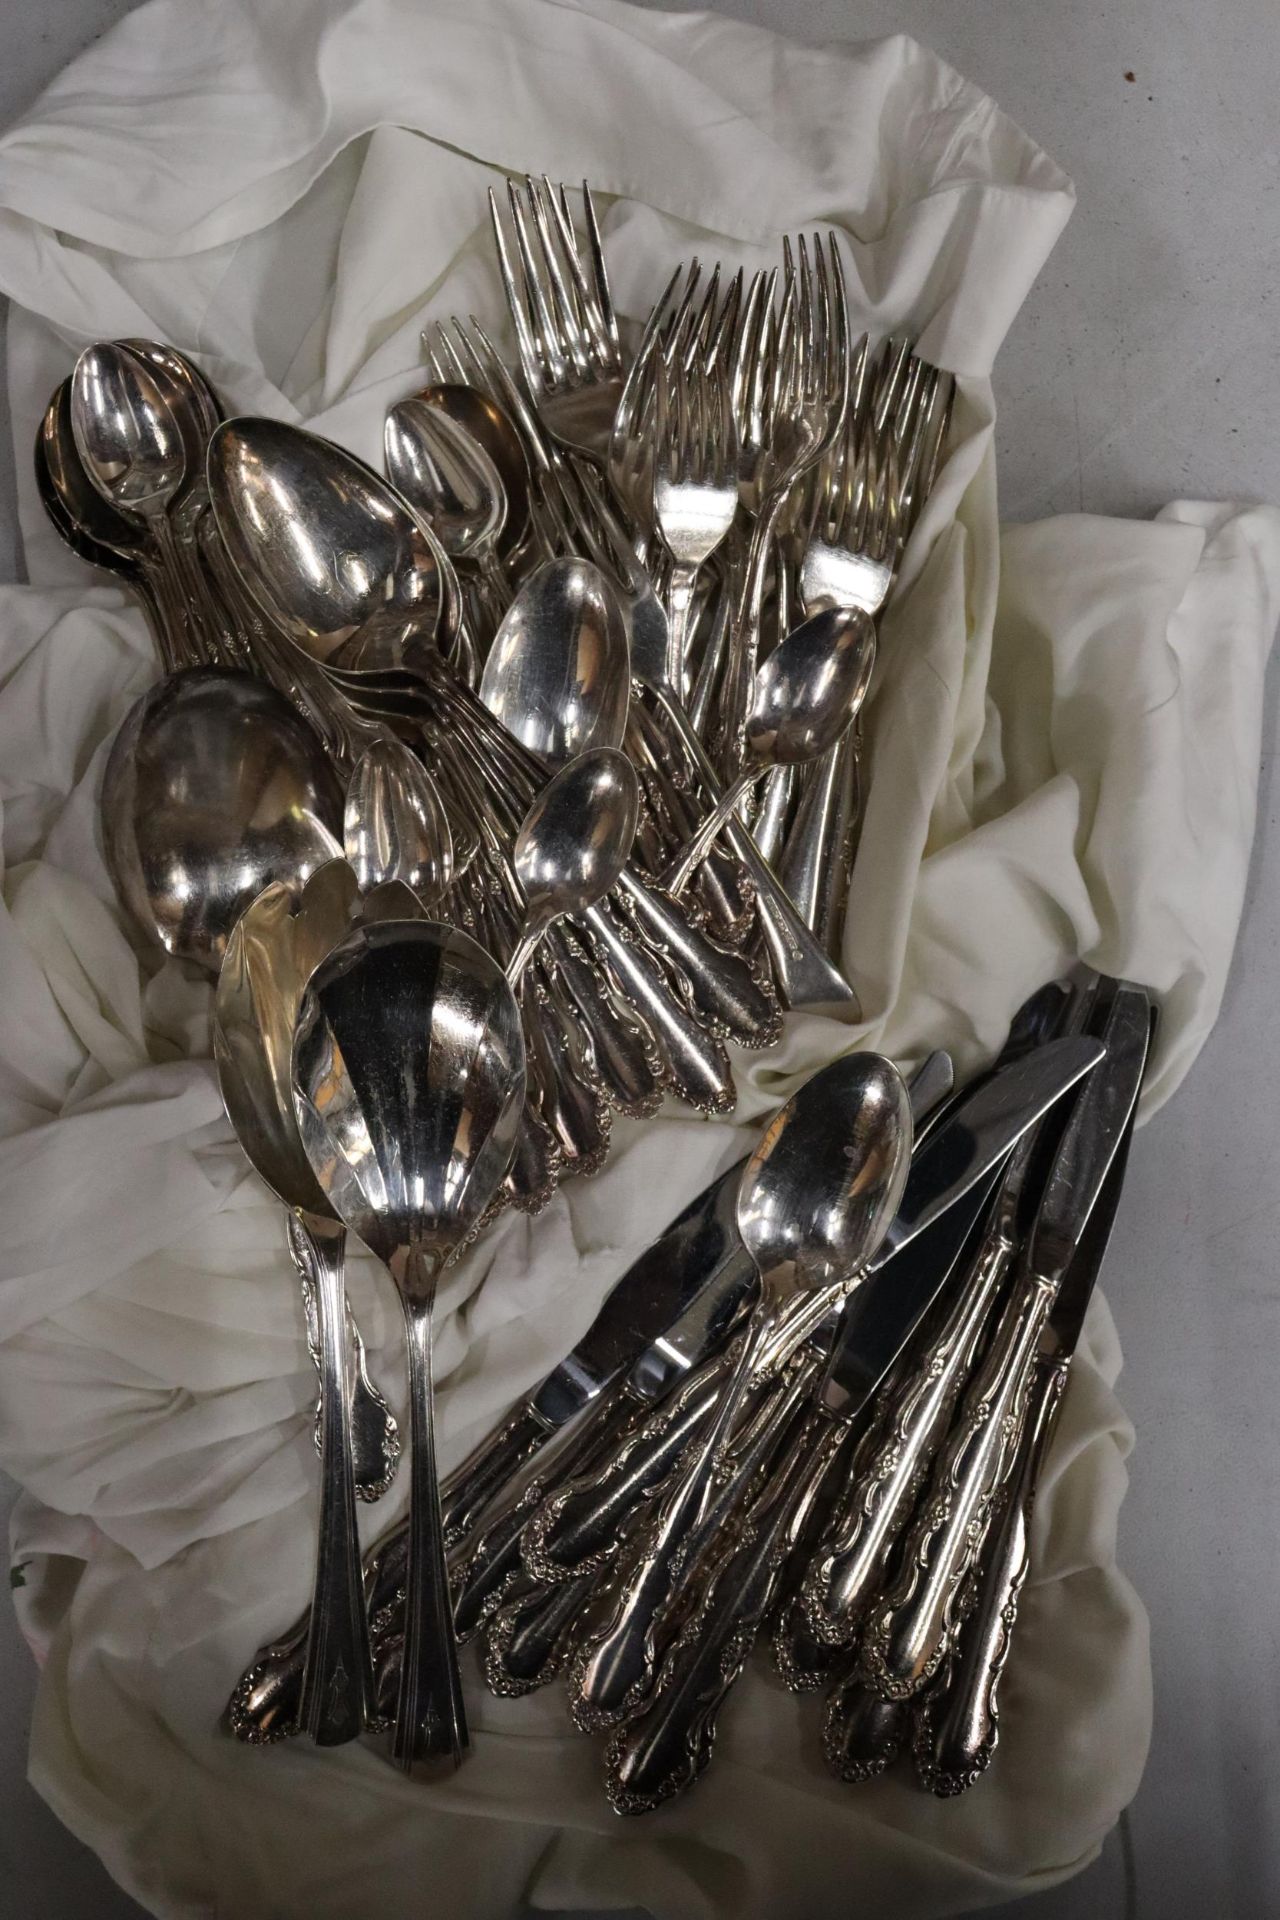 A QUANTITY OF FLATWARE, KNIVES, FORKS AND SPOONS - Image 9 of 9